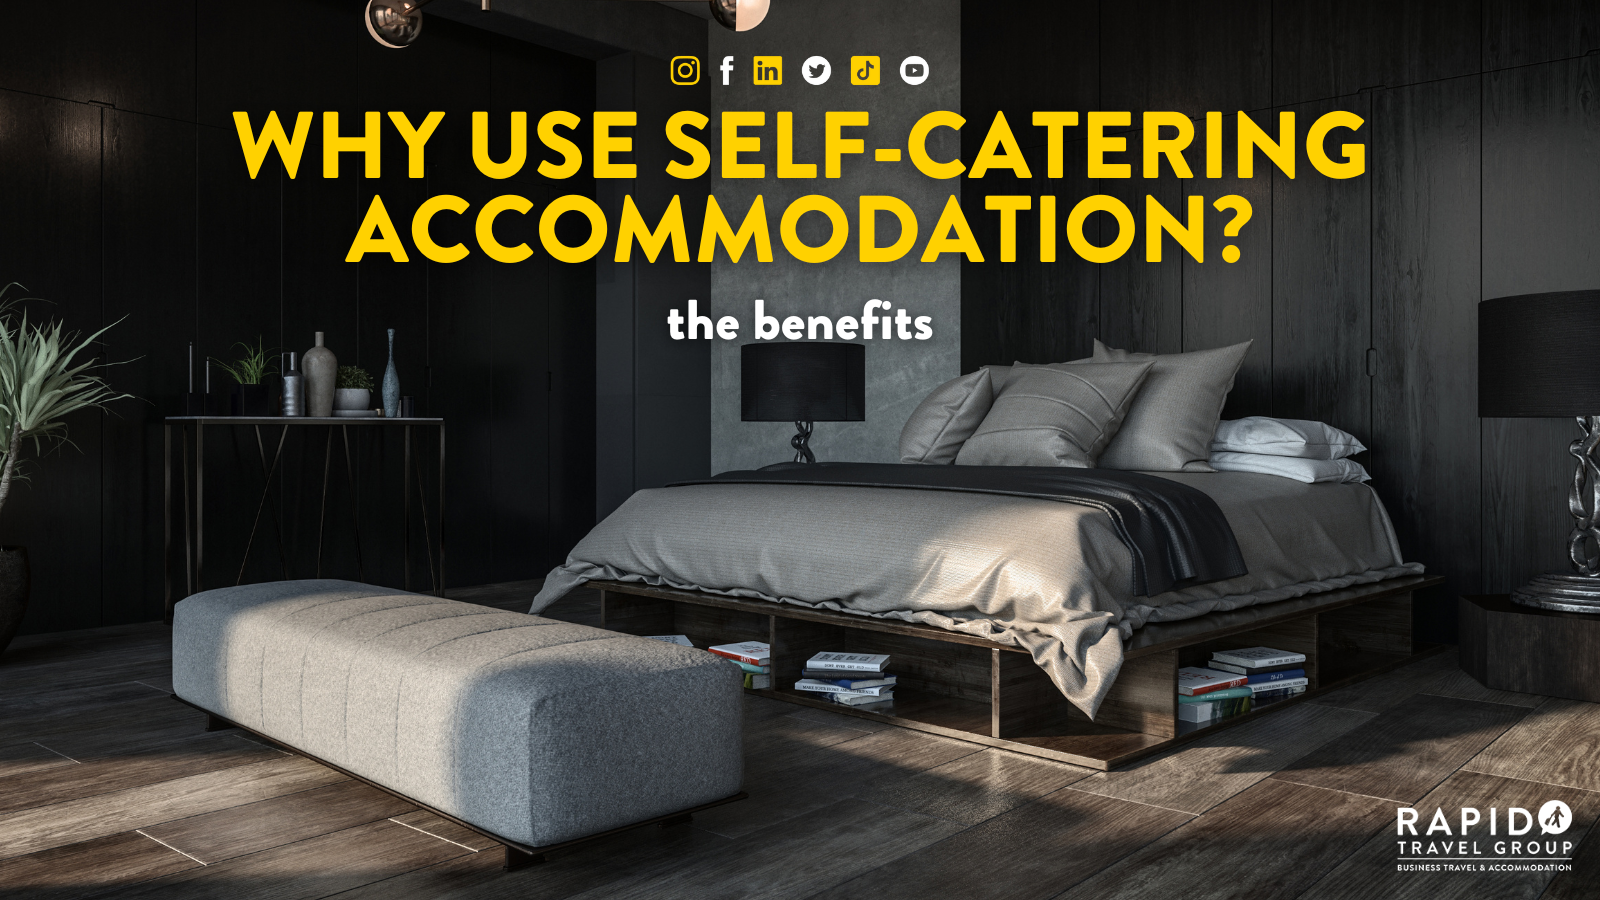 why use self-catering accommodation? the benefits